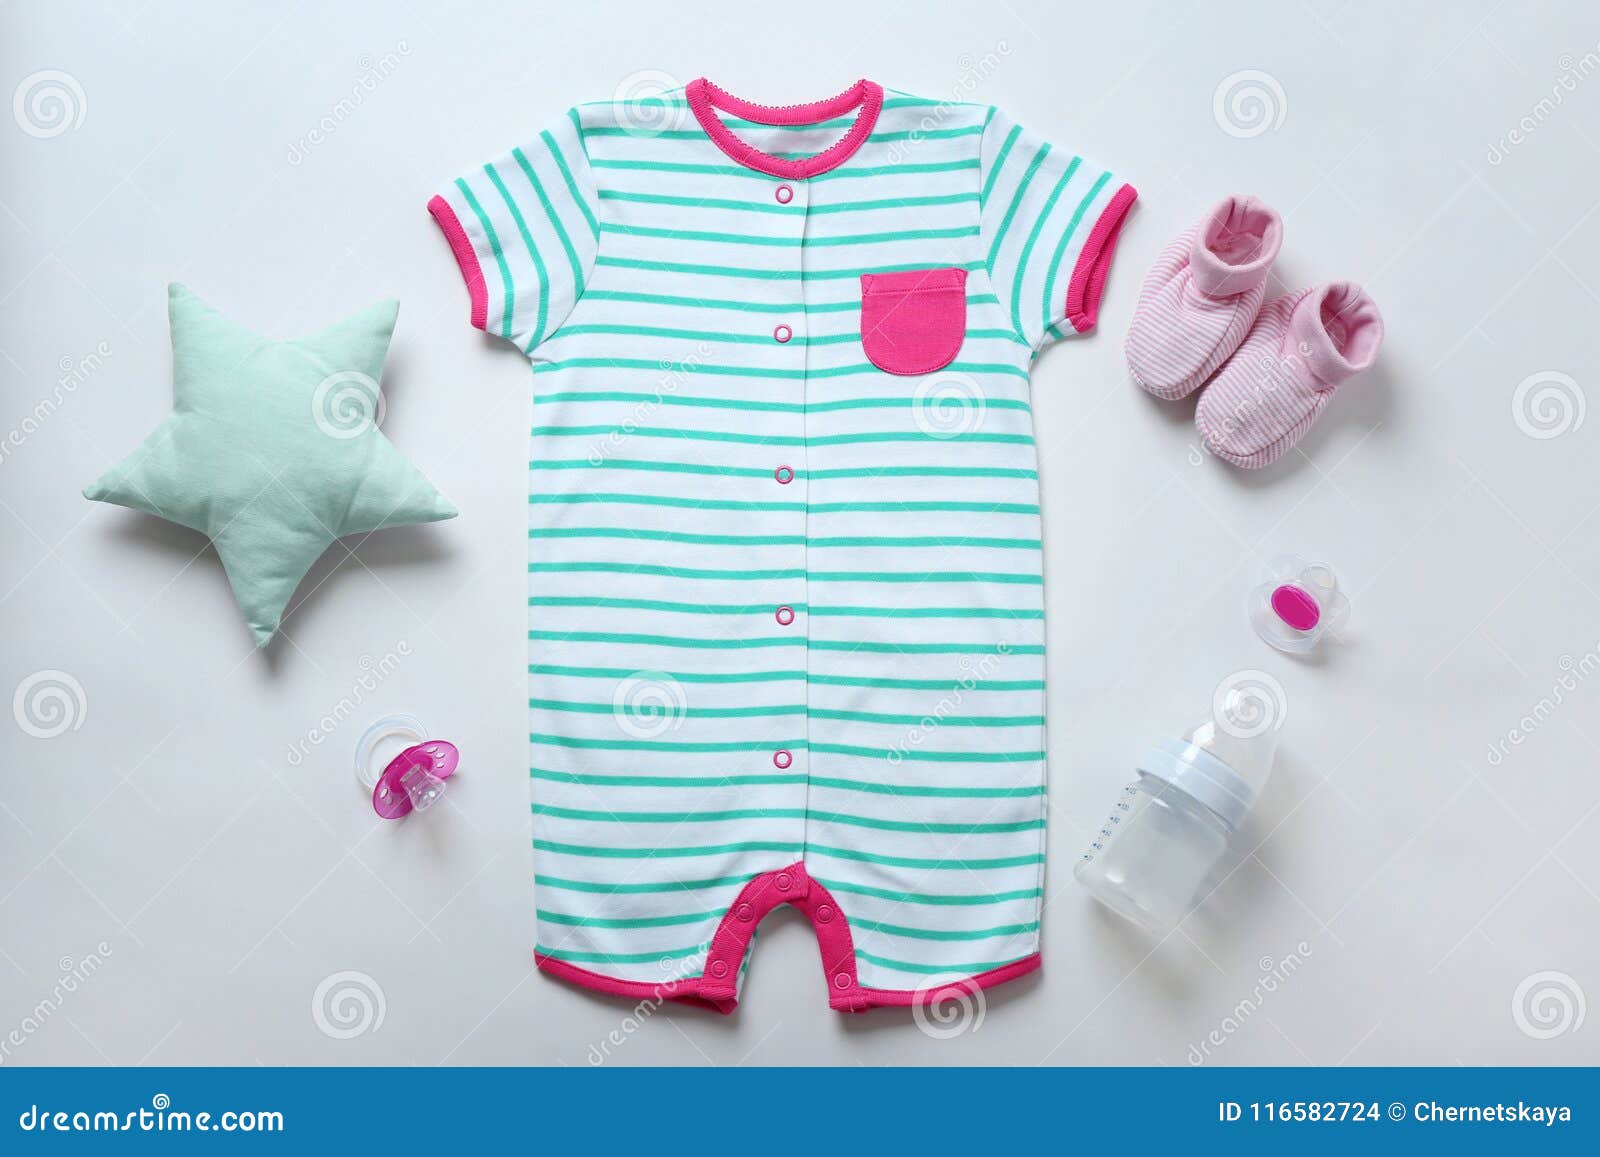 Baby Clothes and Necessities Stock Photo - Image of fashion, infant ...